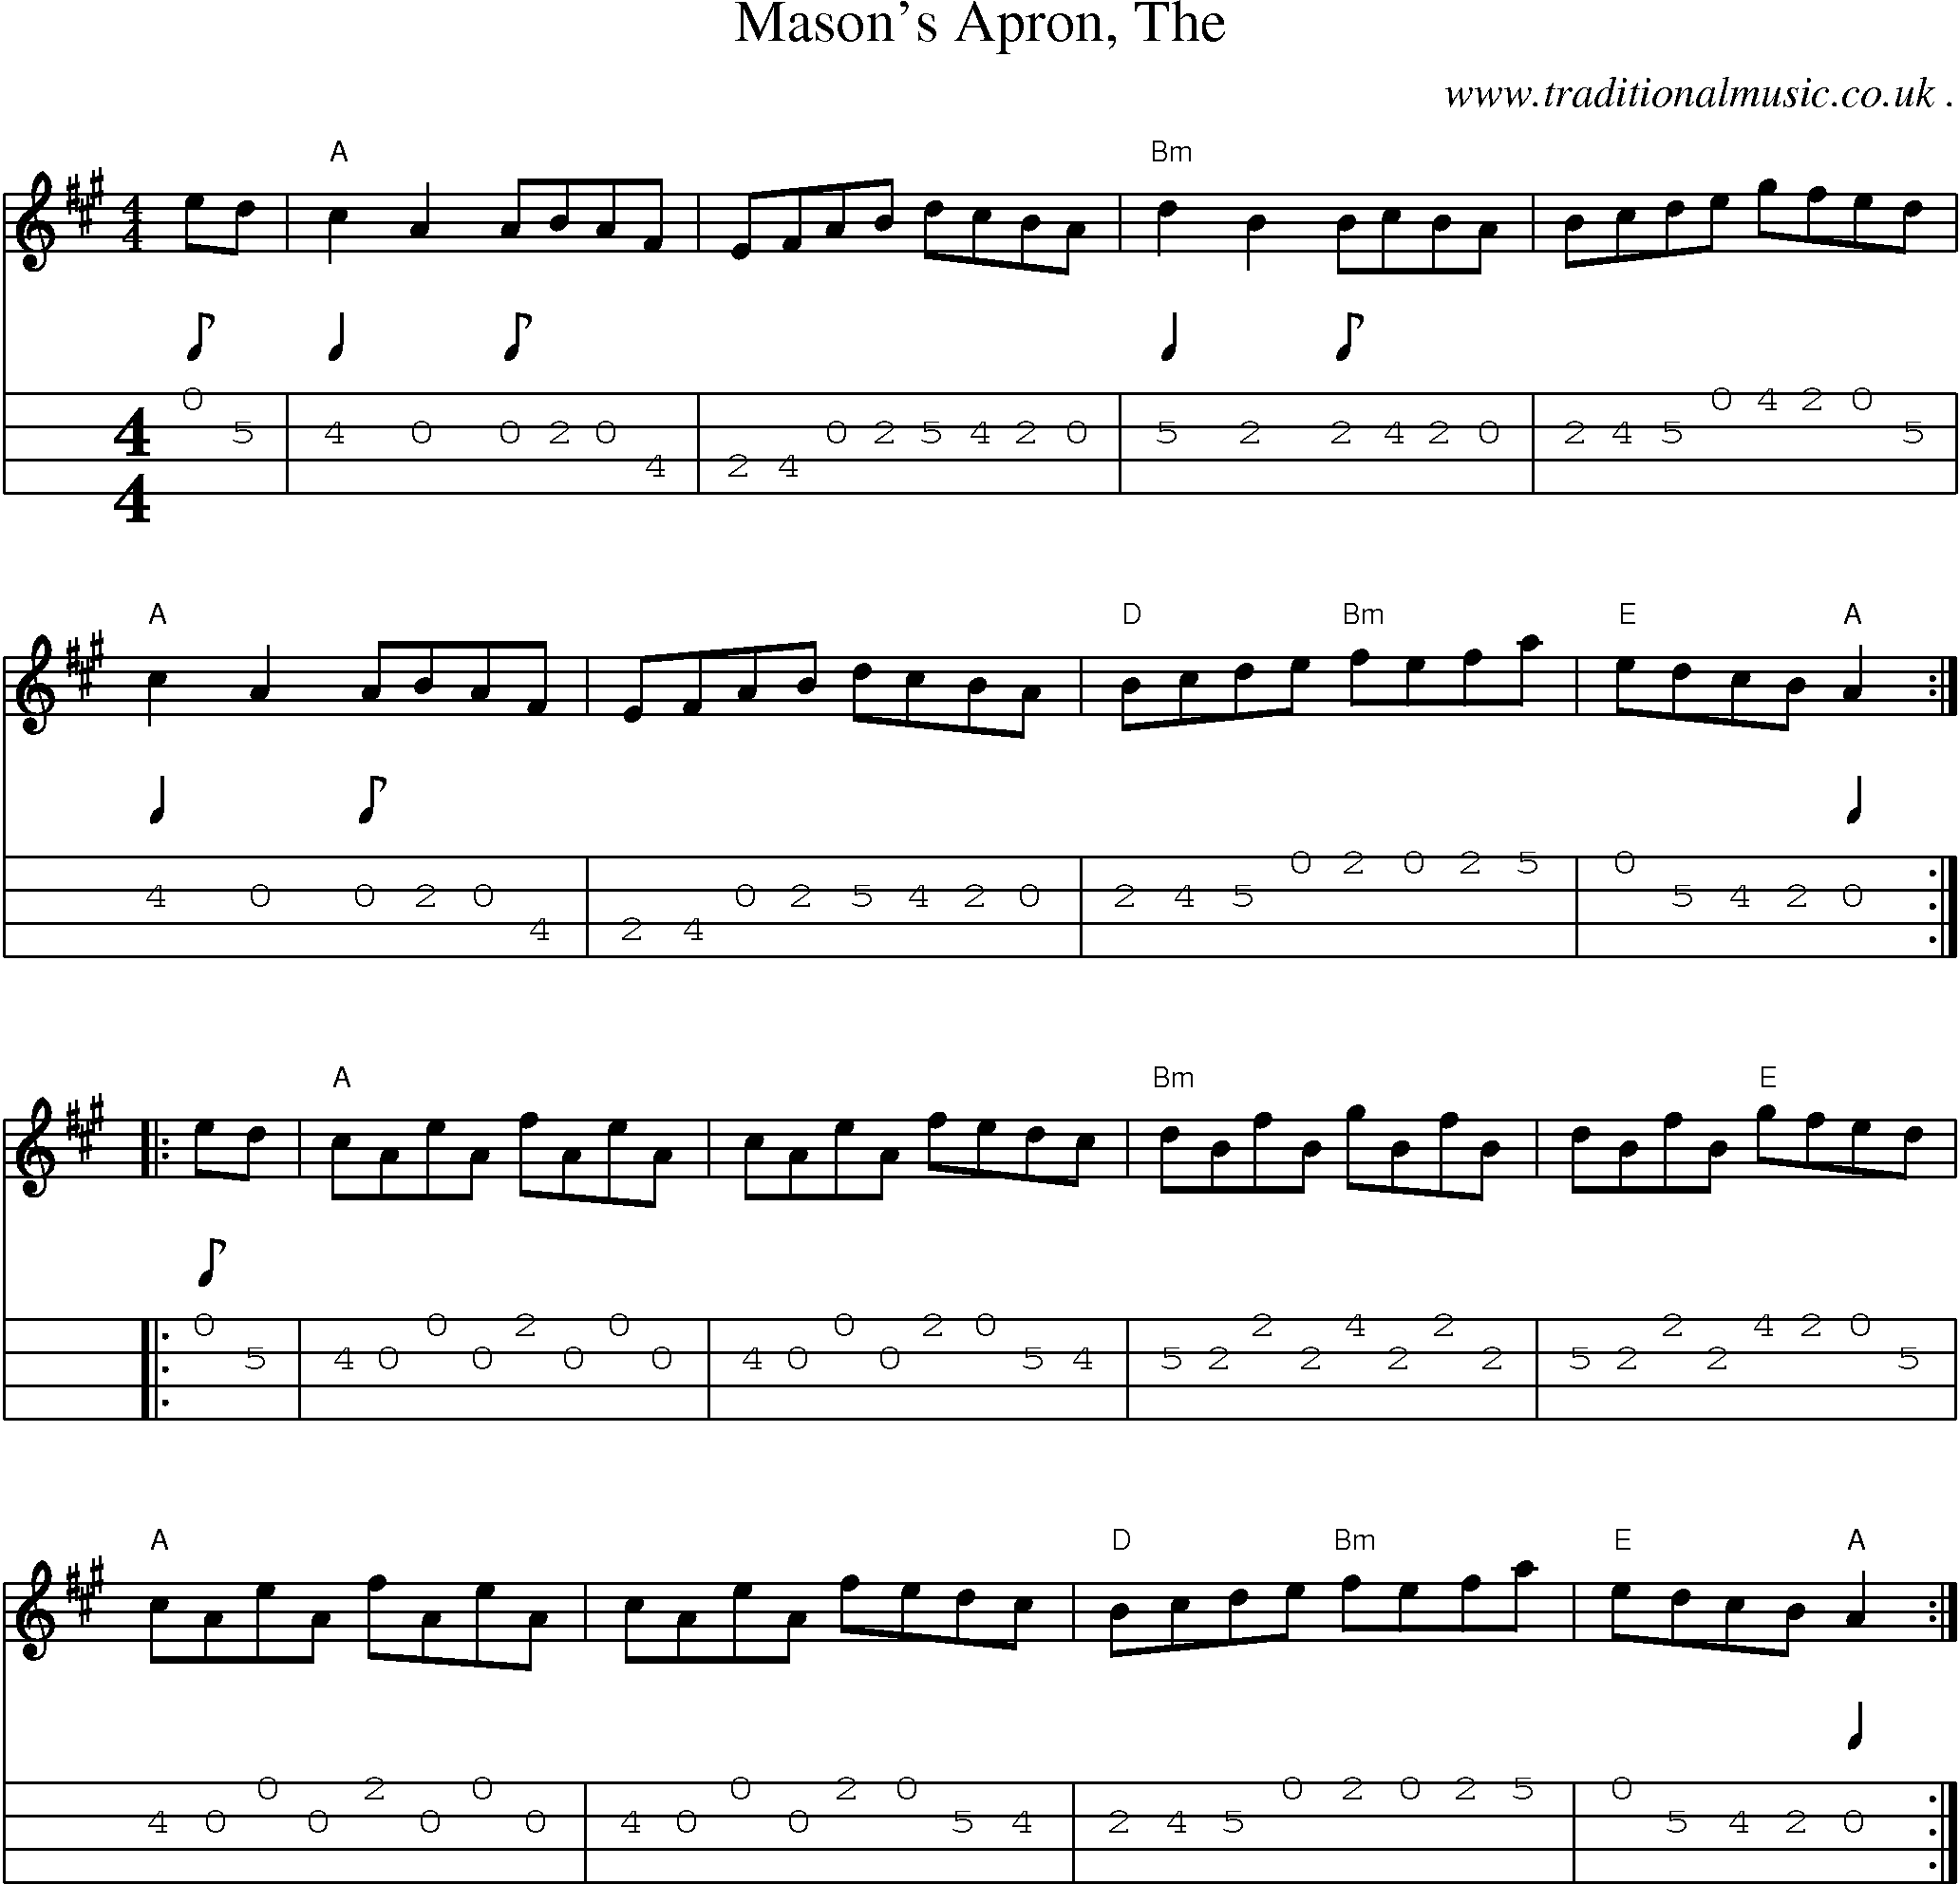 Music Score and Guitar Tabs for Masons Apron The1